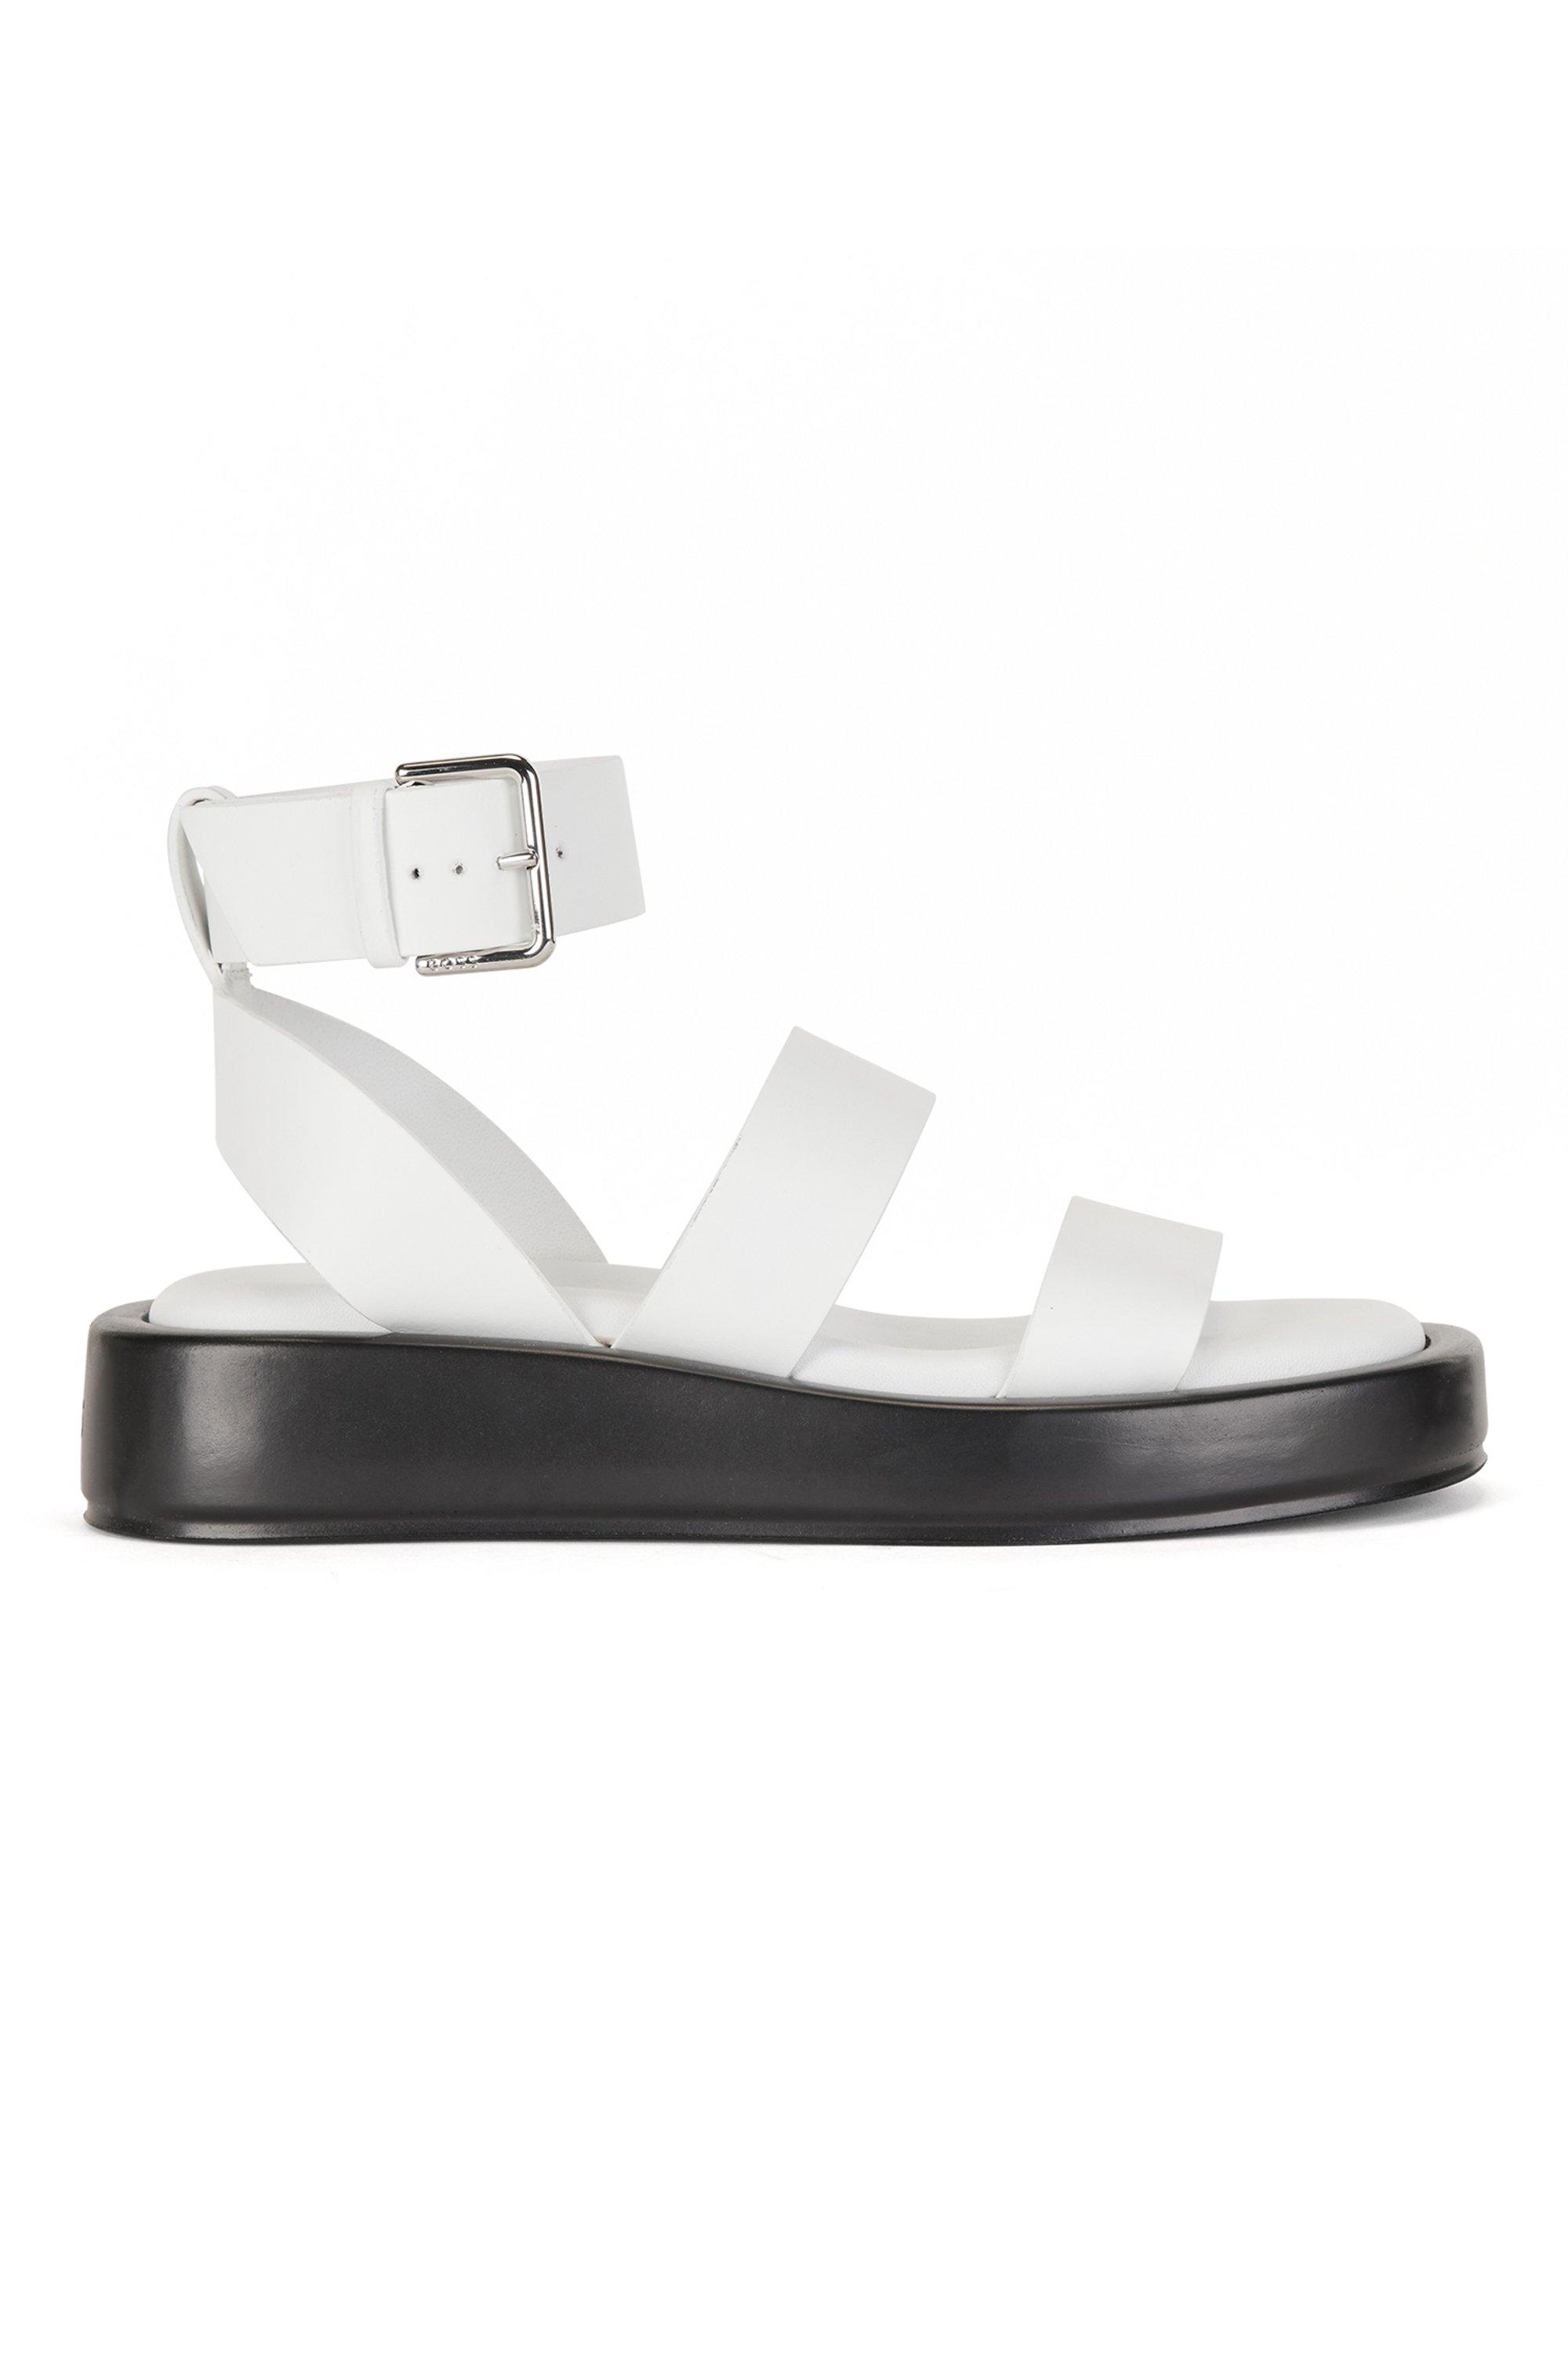 BOSS by HUGO BOSS Italian-leather Sandals With Platform Sole in White | Lyst